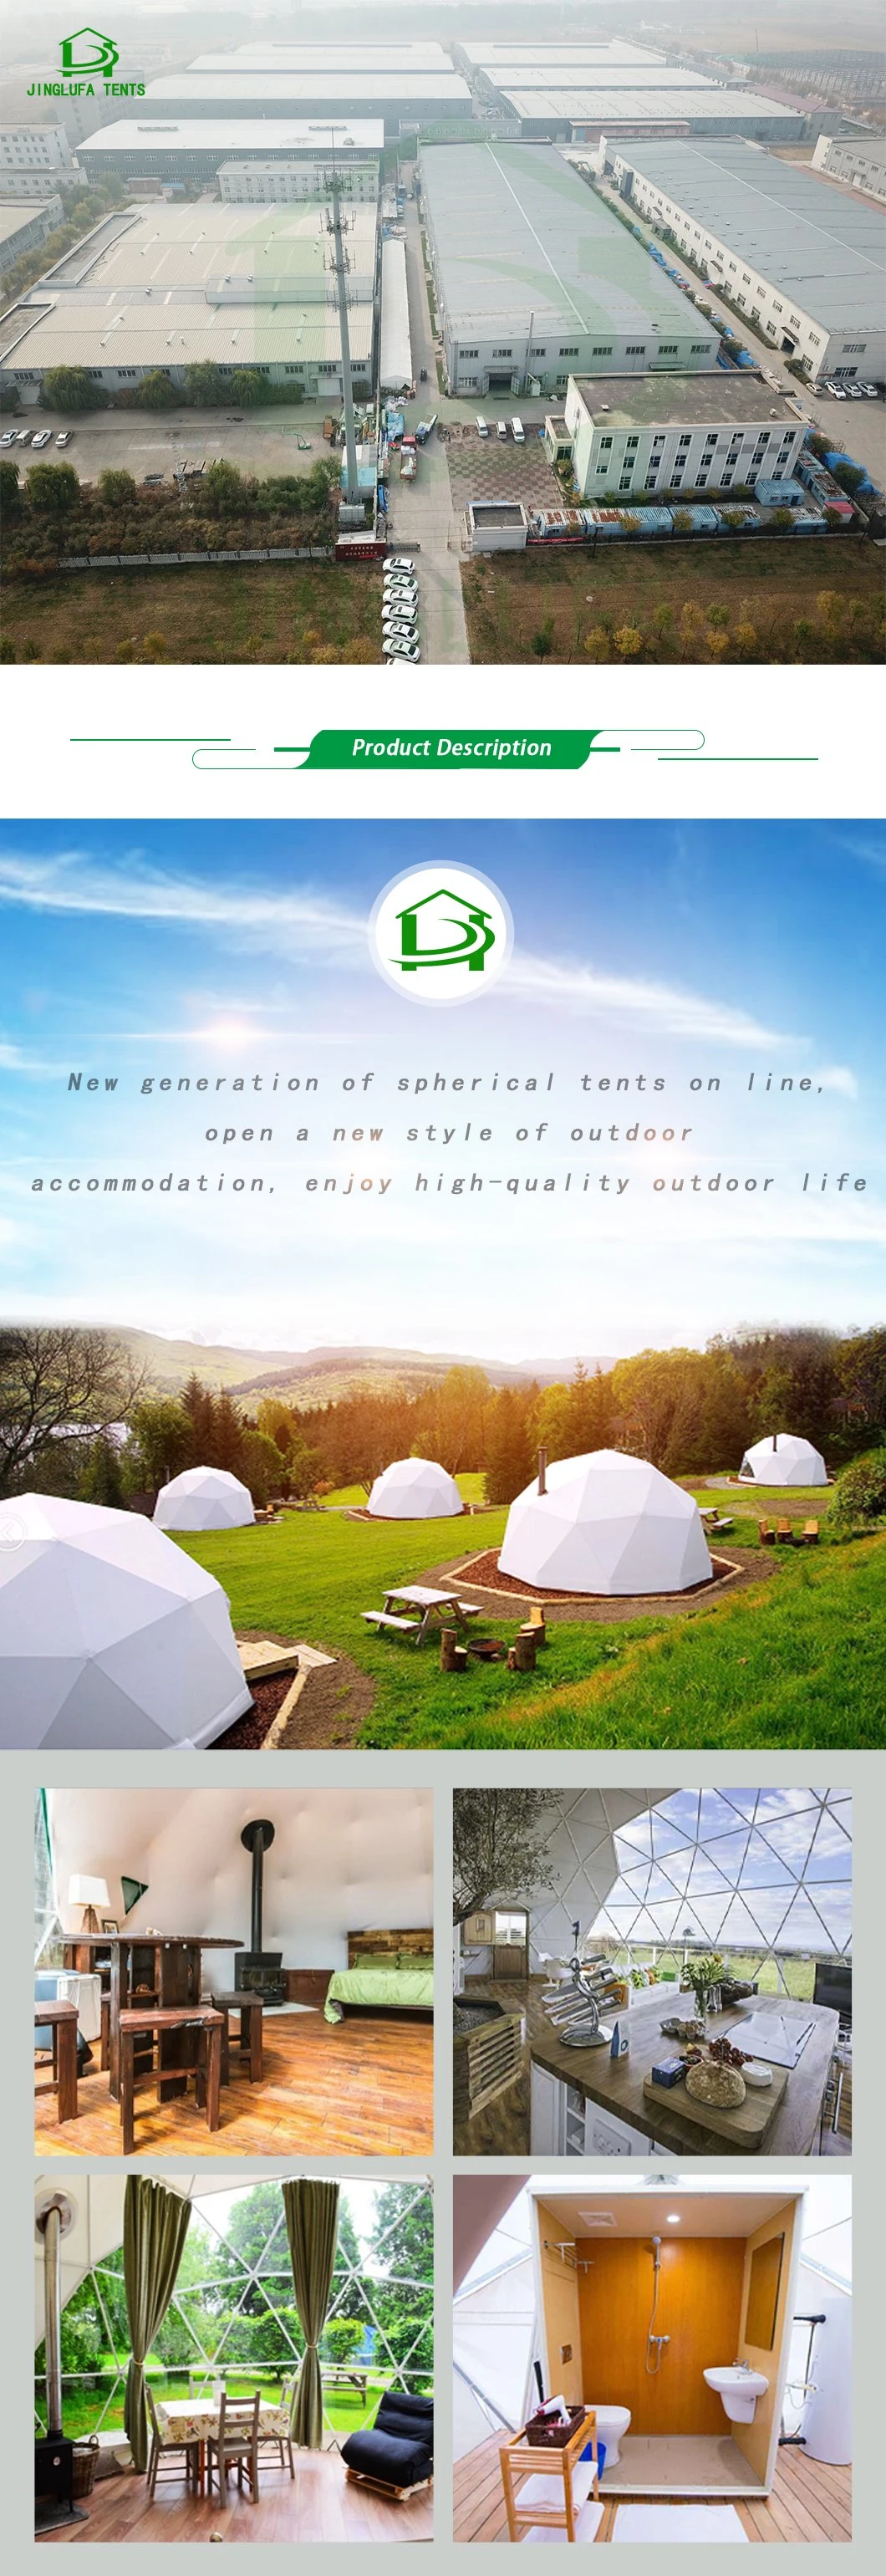 The Transparent Geodetic Dome Garden Tent